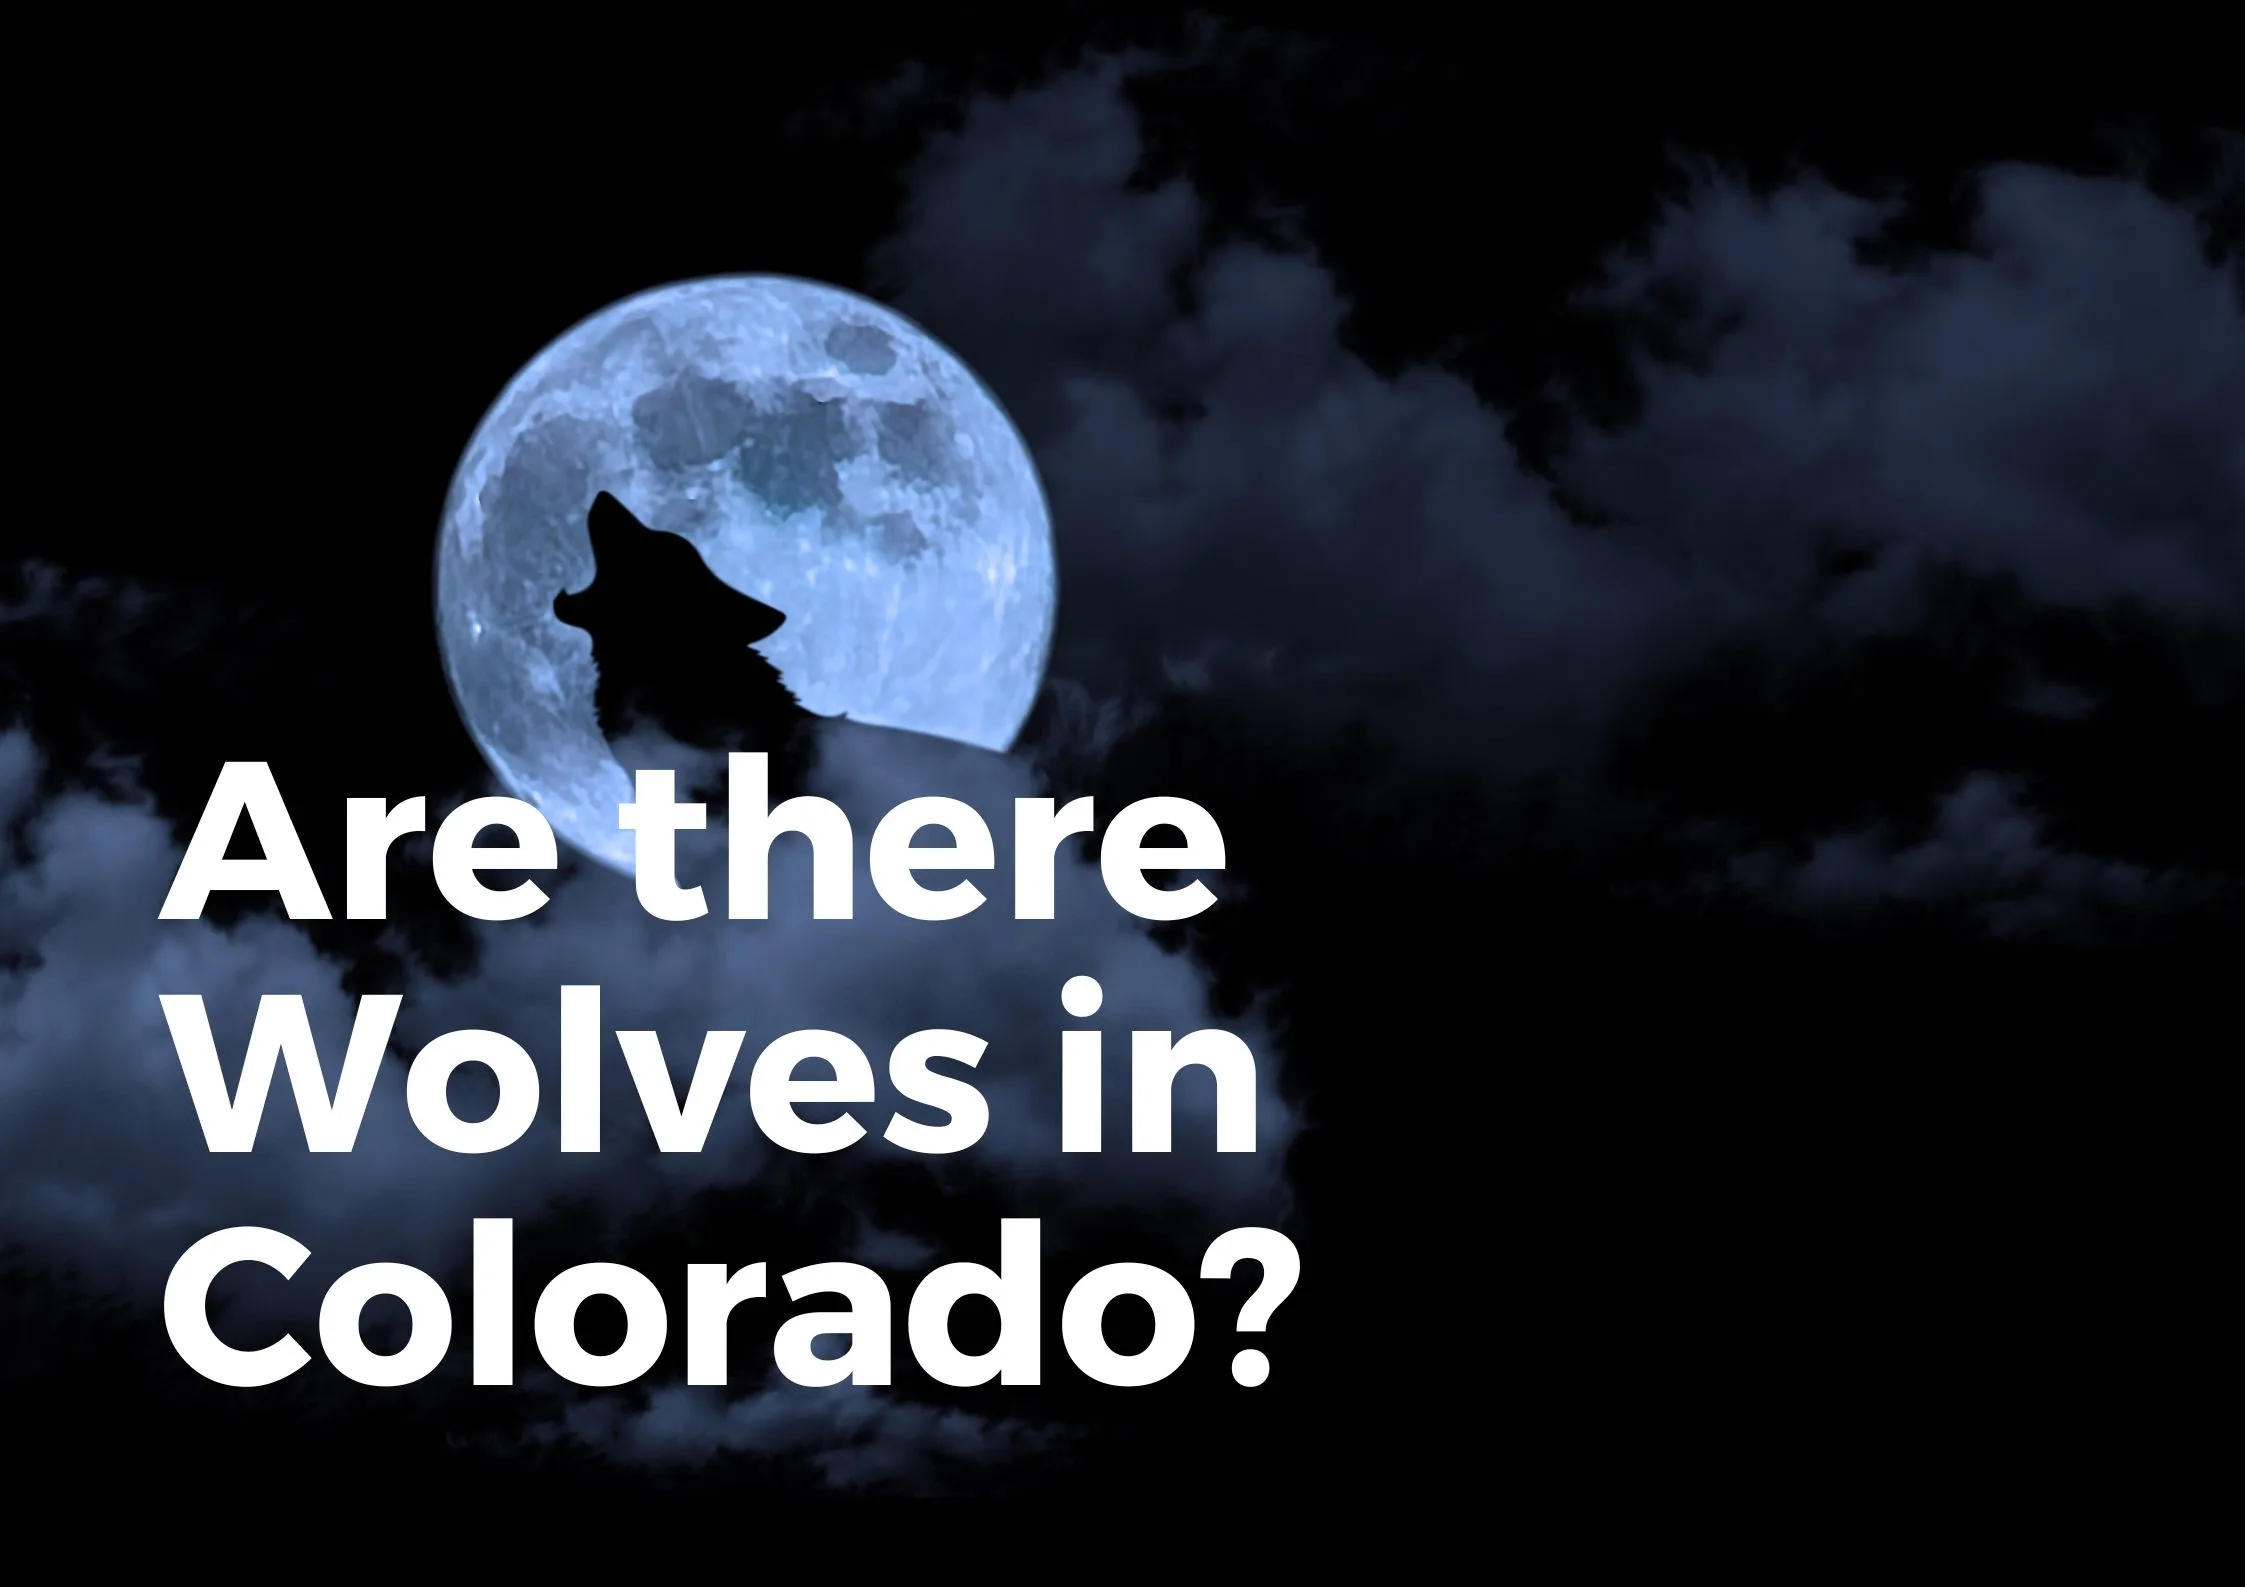 Are there wolves in Colorado